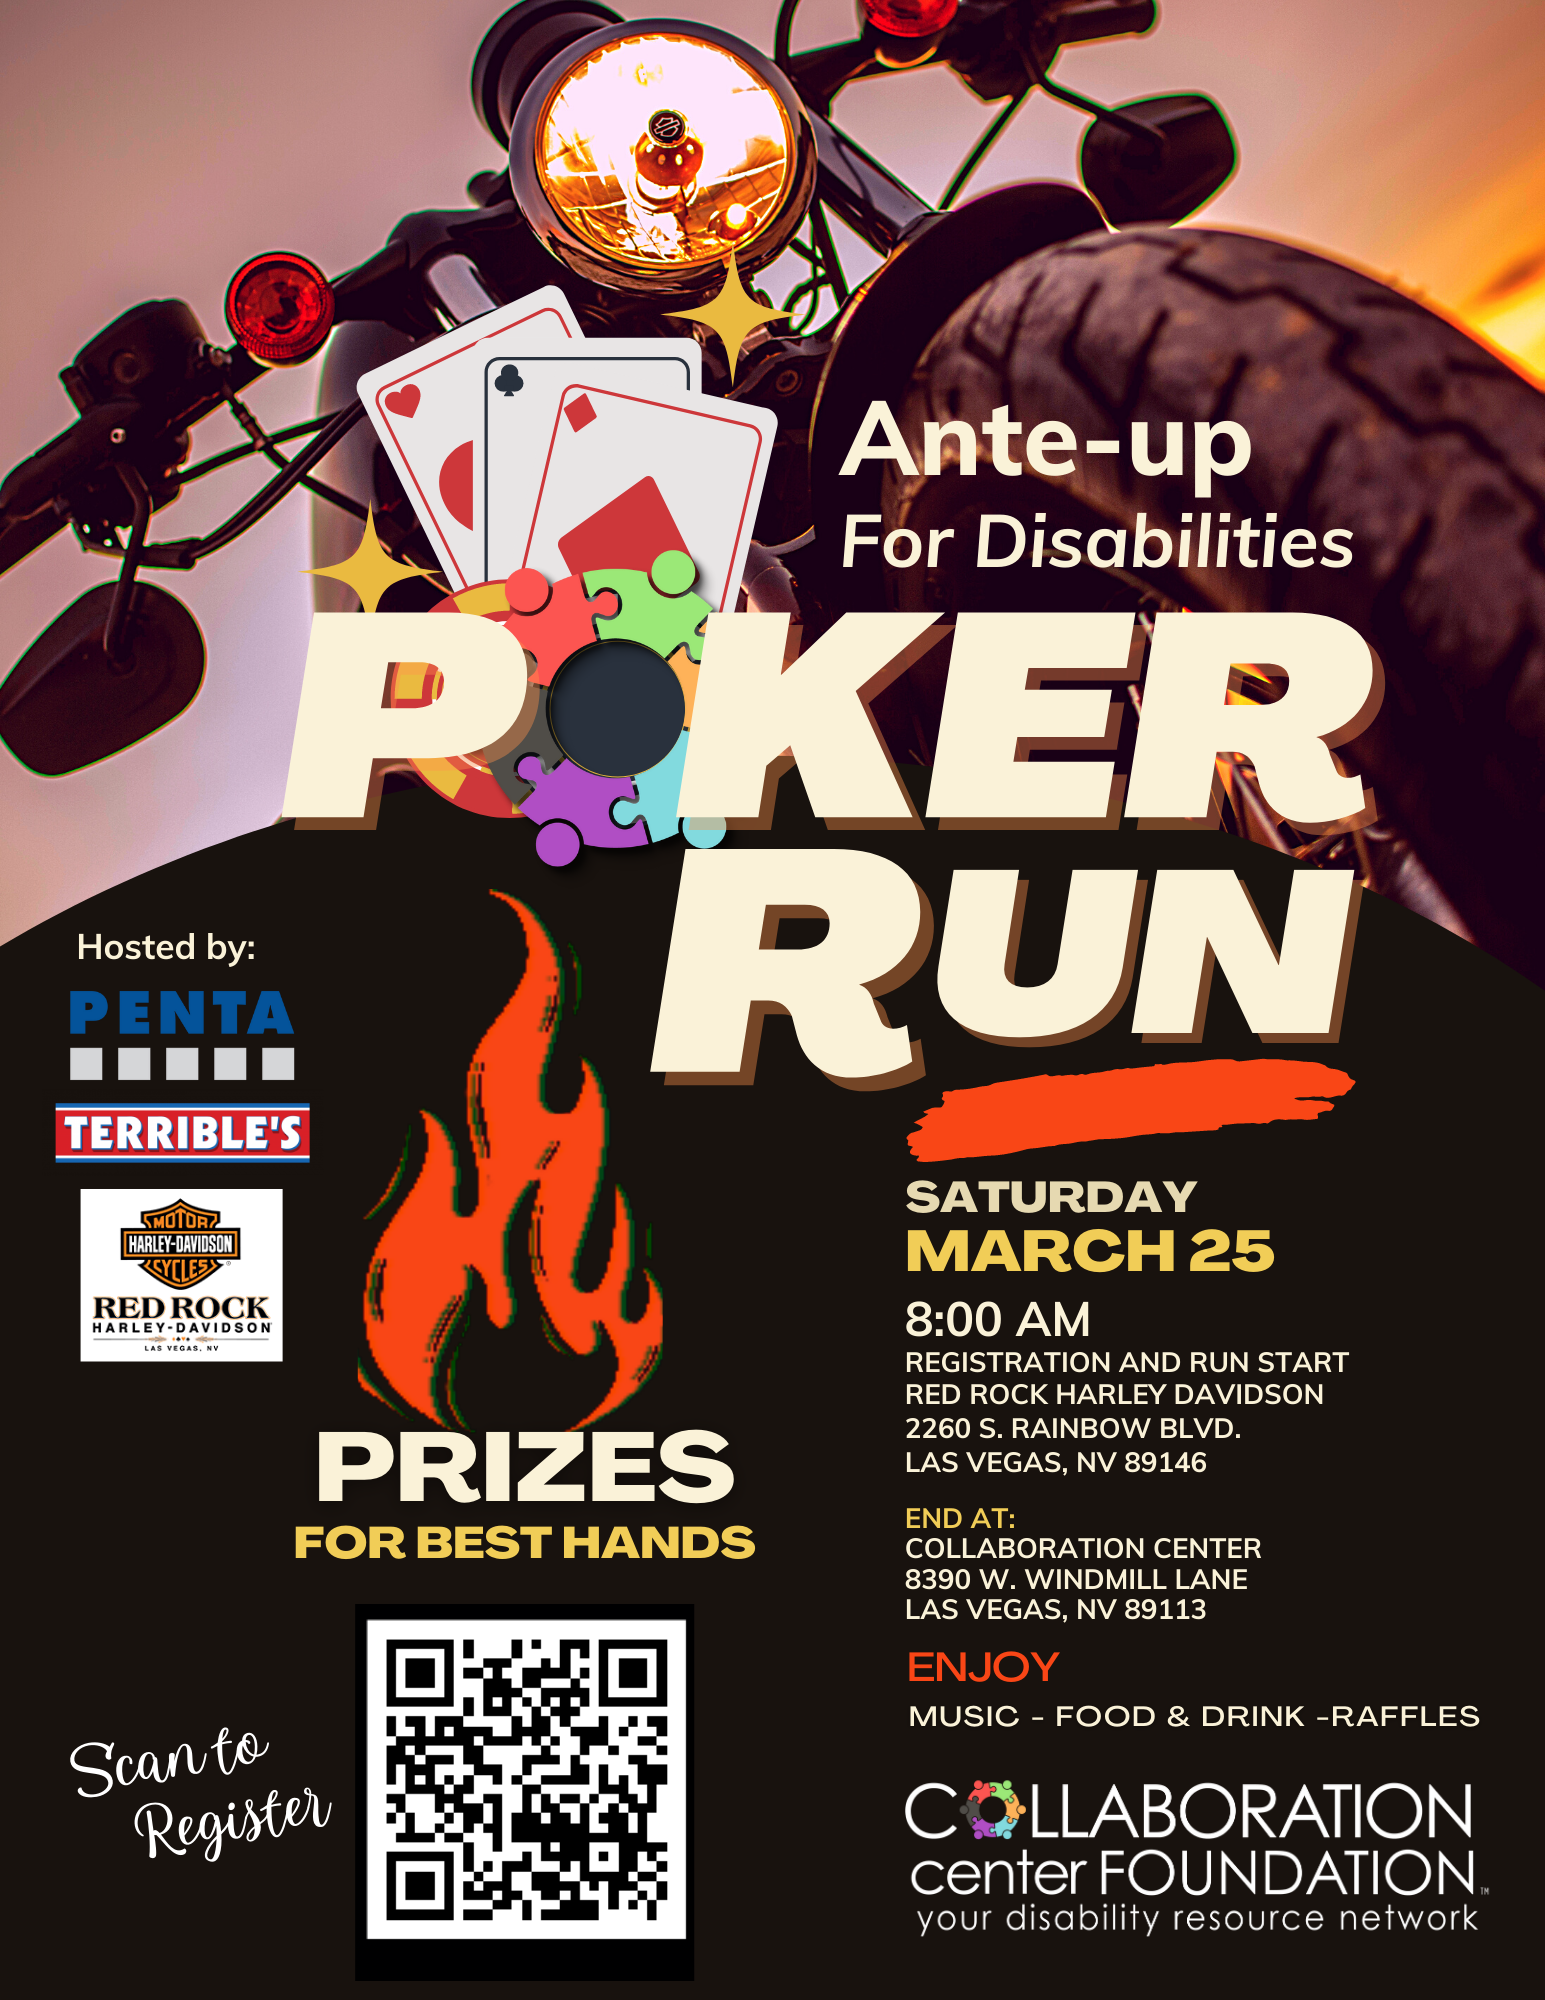 Ante-up for Disabilities Poker Run